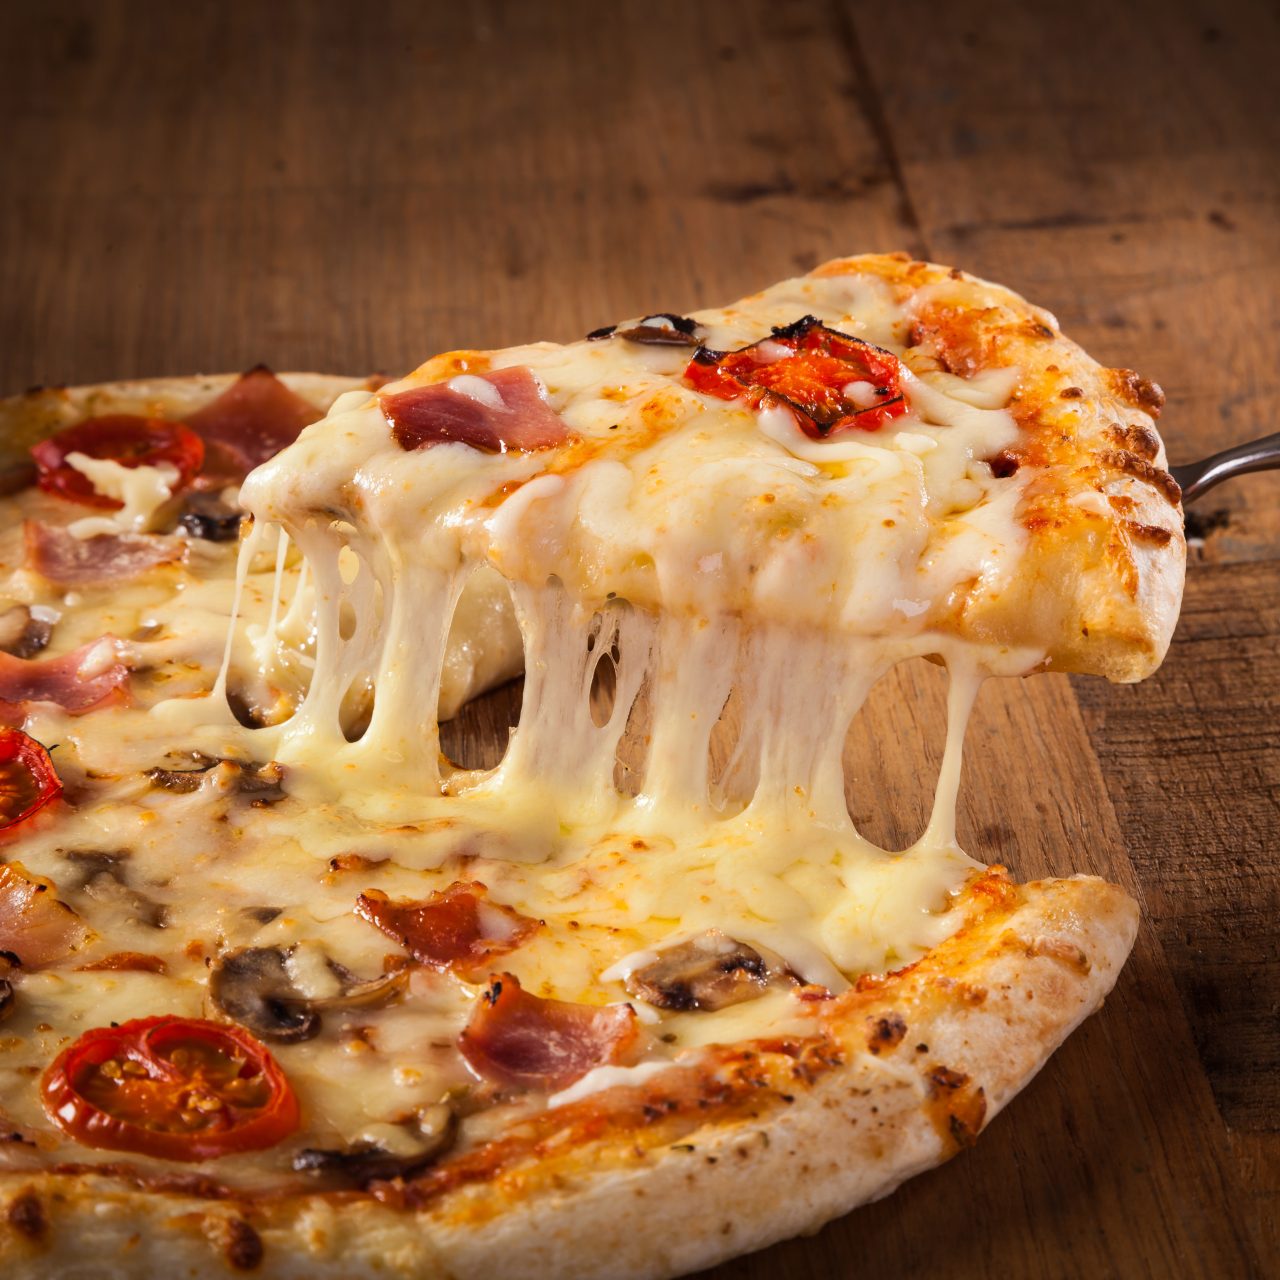 Hot,Pizza,Slice,With,Melting,Cheese,On,A,Rustic,Wooden